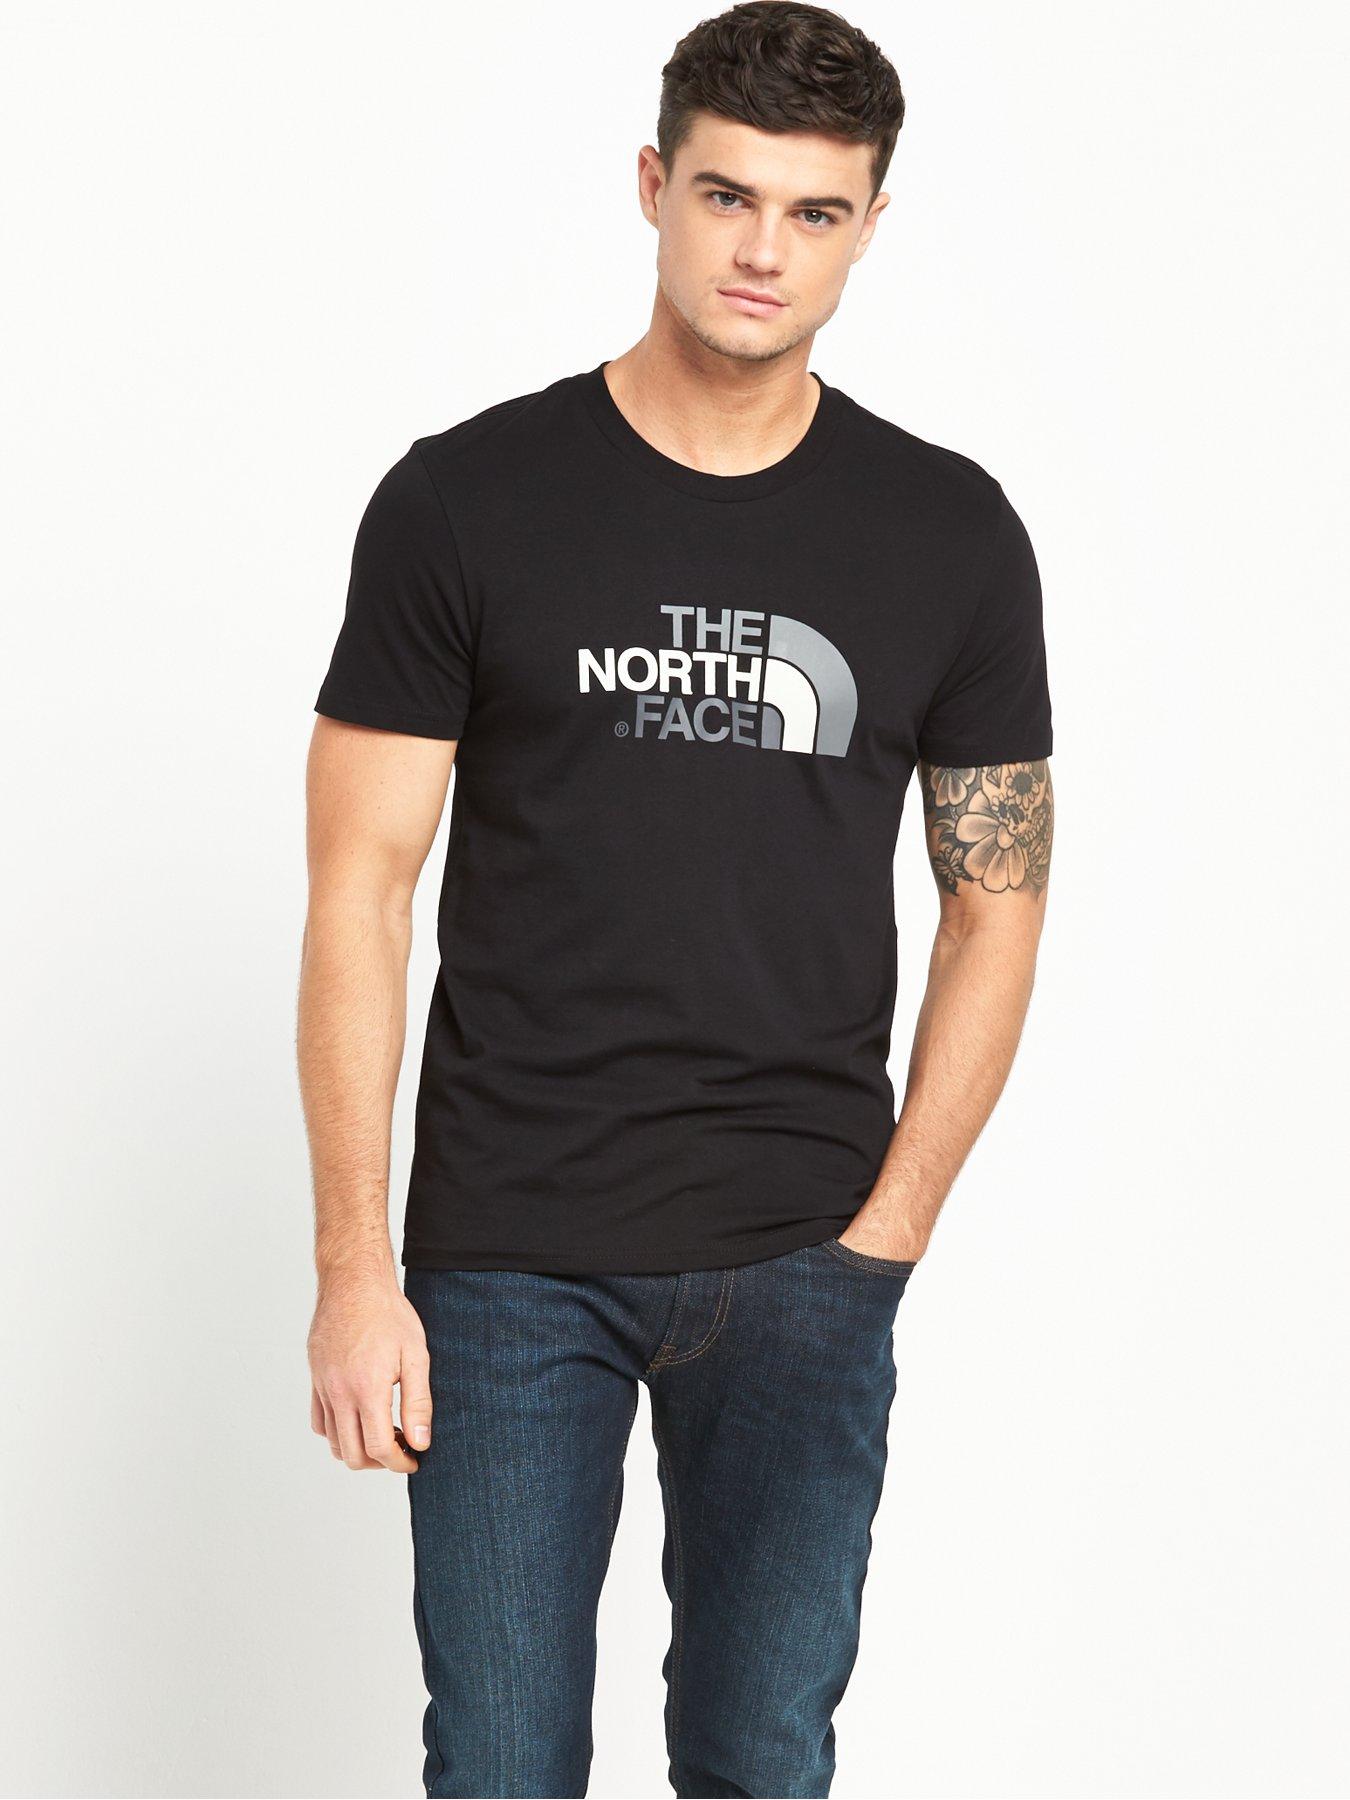 north face sale clearance uk